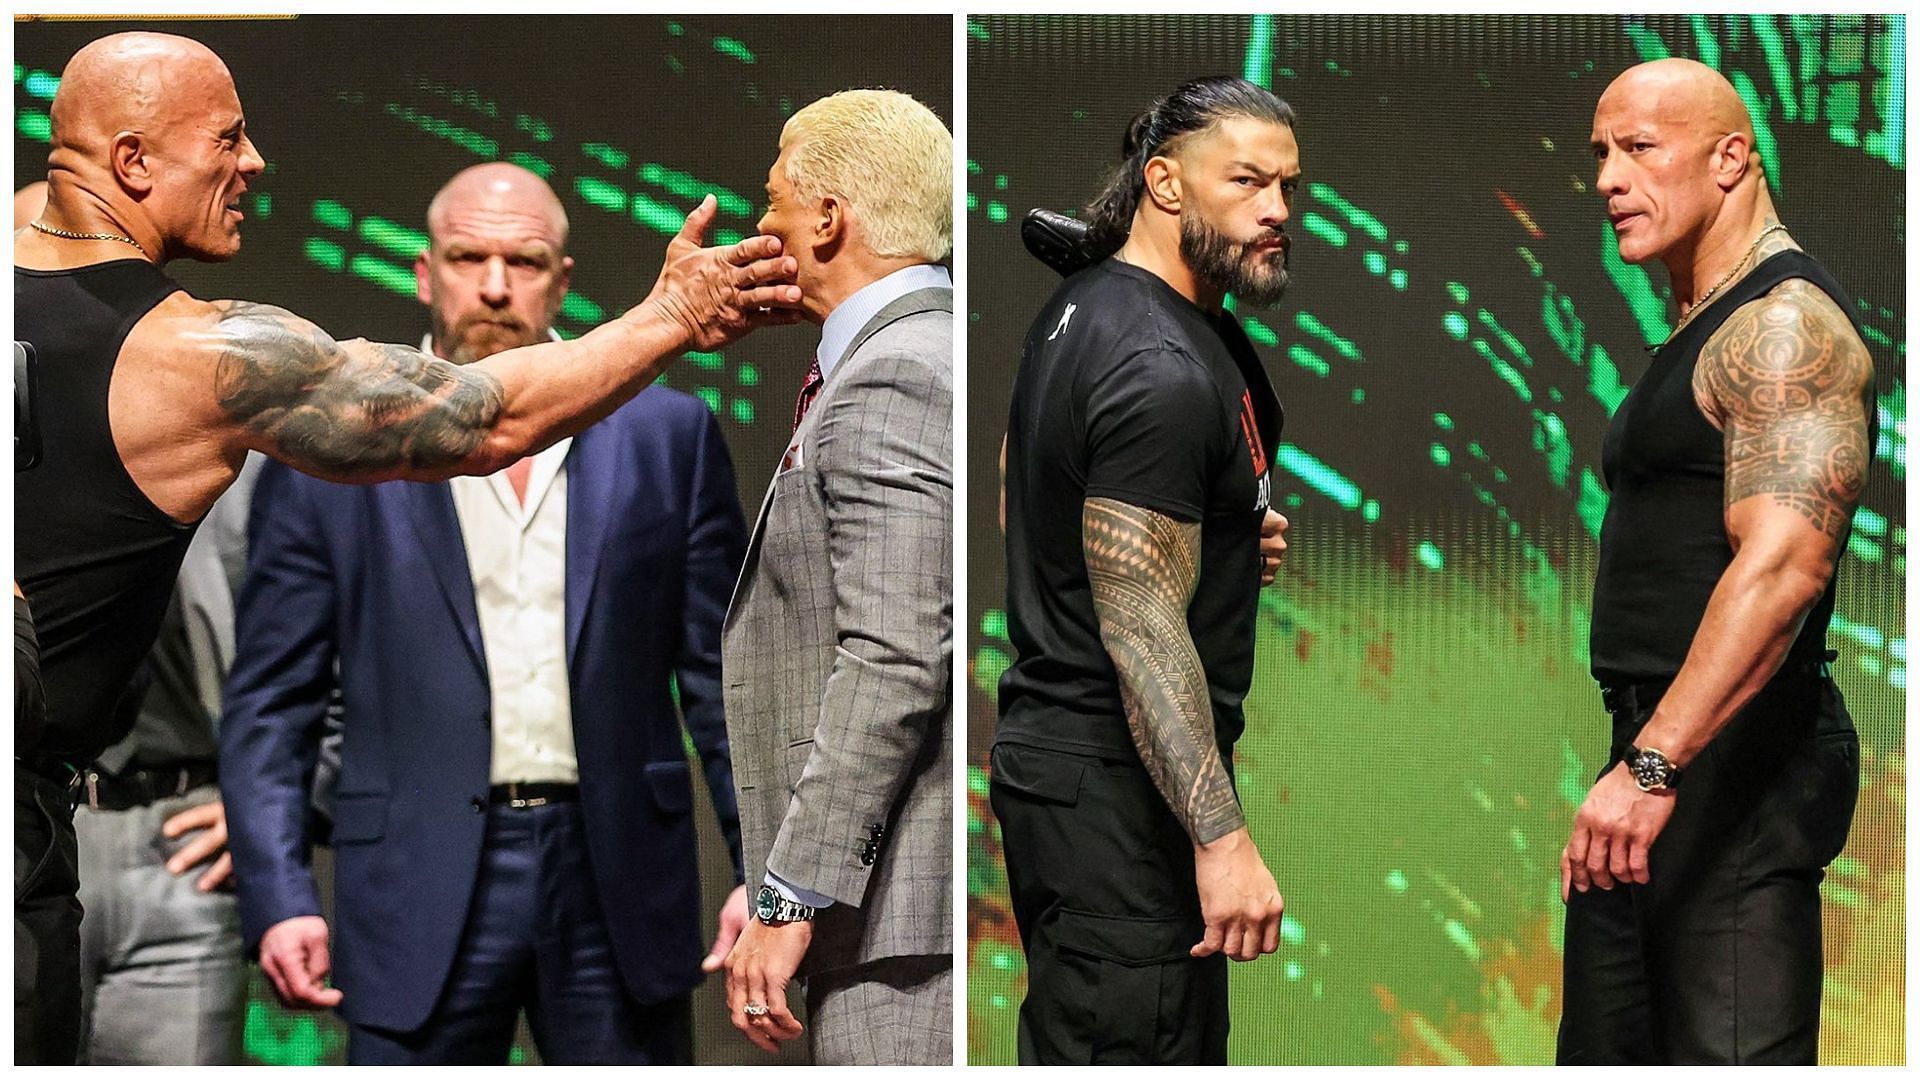 Roman Reigns, Cody Rhodes and The Rock during WWE media event.